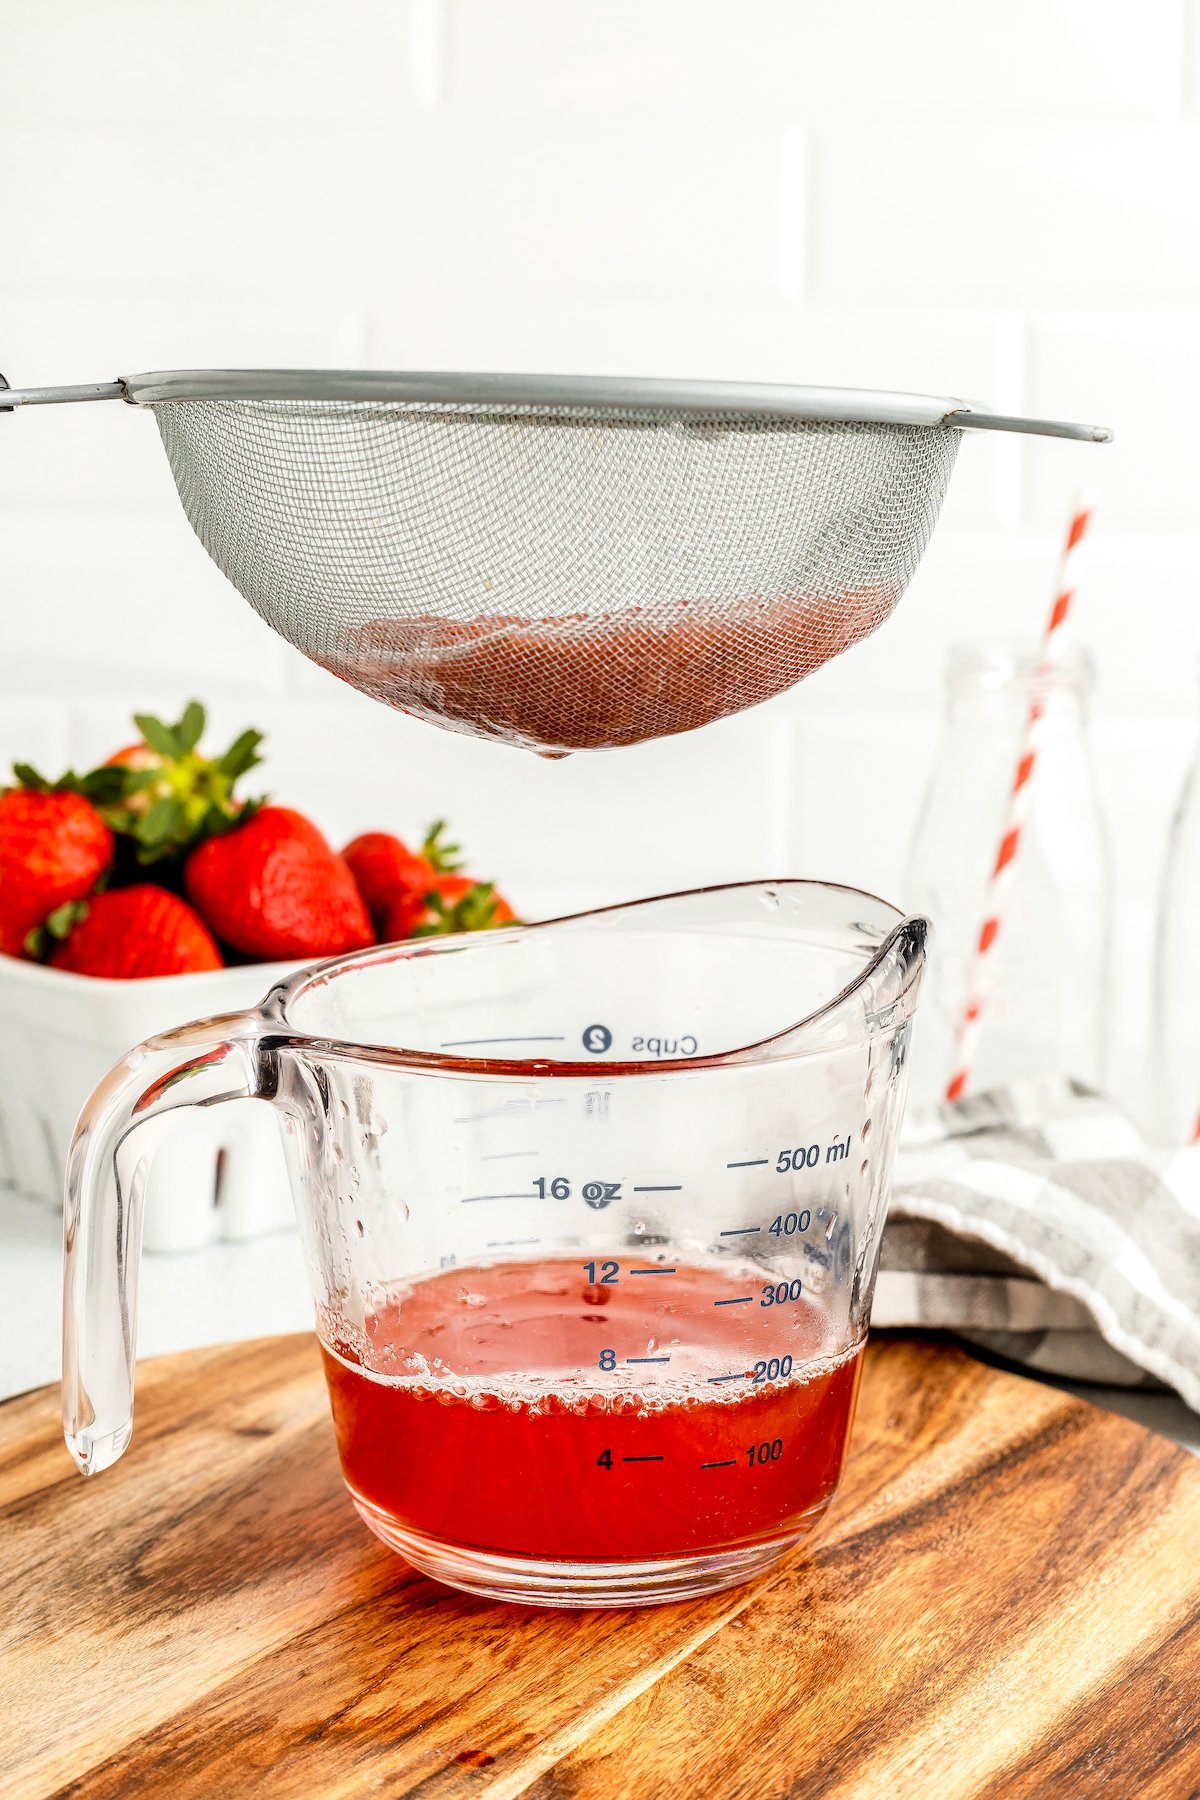 A strainer is held over a measuring cup full of red syrup.